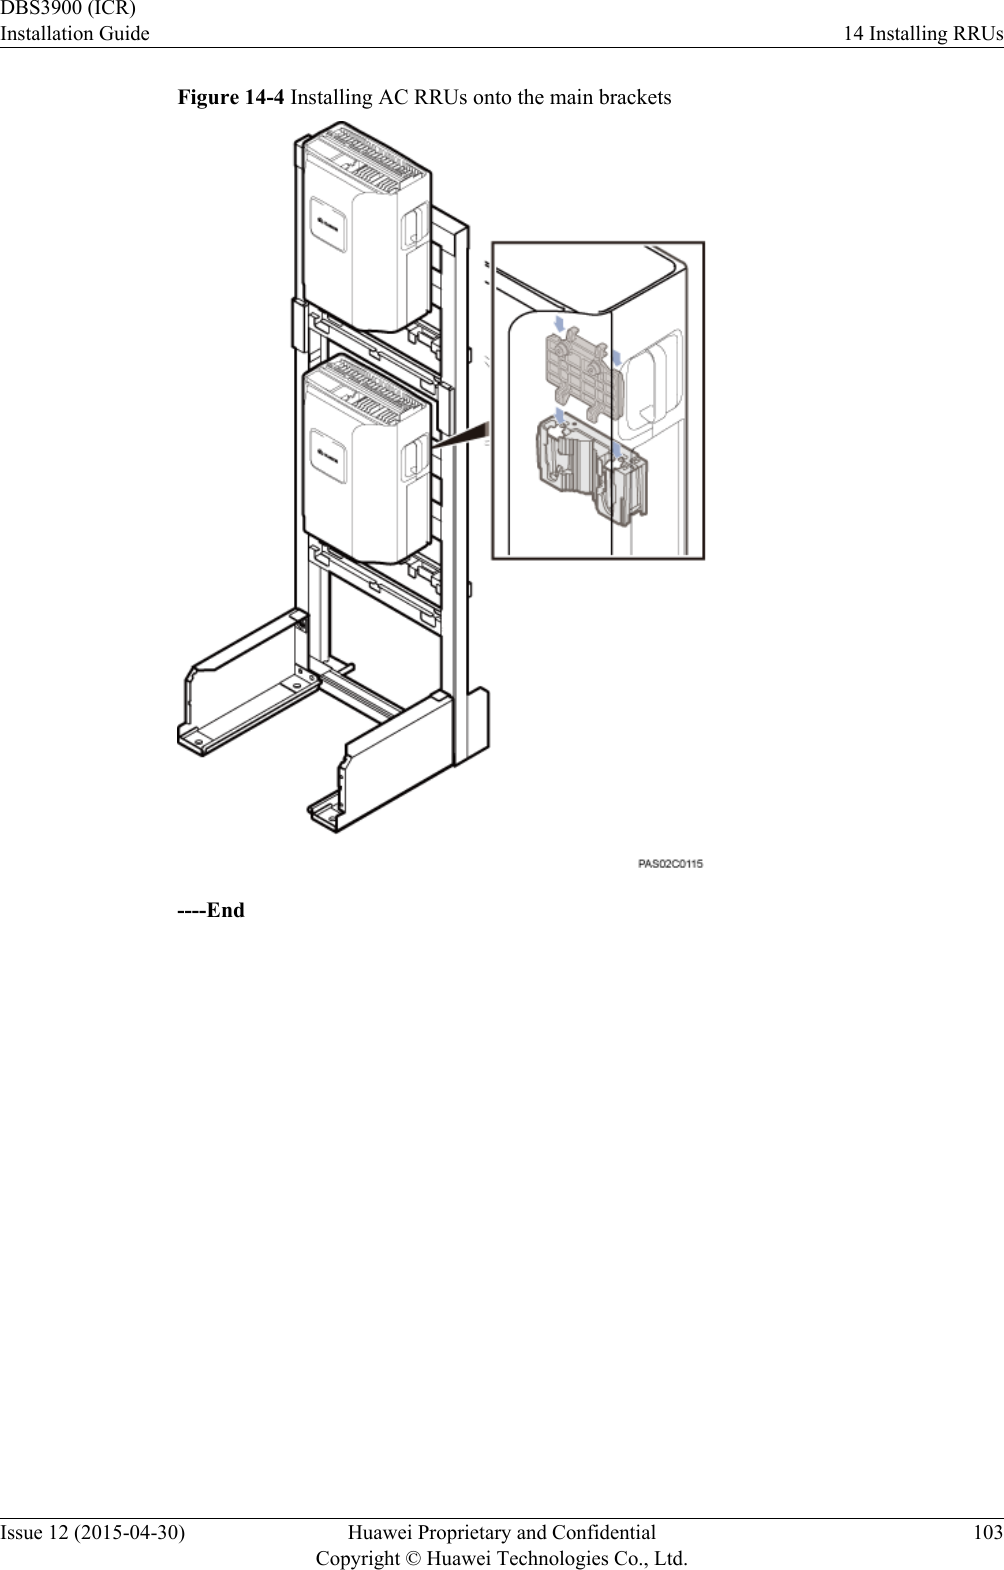 Figure 14-4 Installing AC RRUs onto the main brackets----EndDBS3900 (ICR)Installation Guide 14 Installing RRUsIssue 12 (2015-04-30) Huawei Proprietary and ConfidentialCopyright © Huawei Technologies Co., Ltd.103